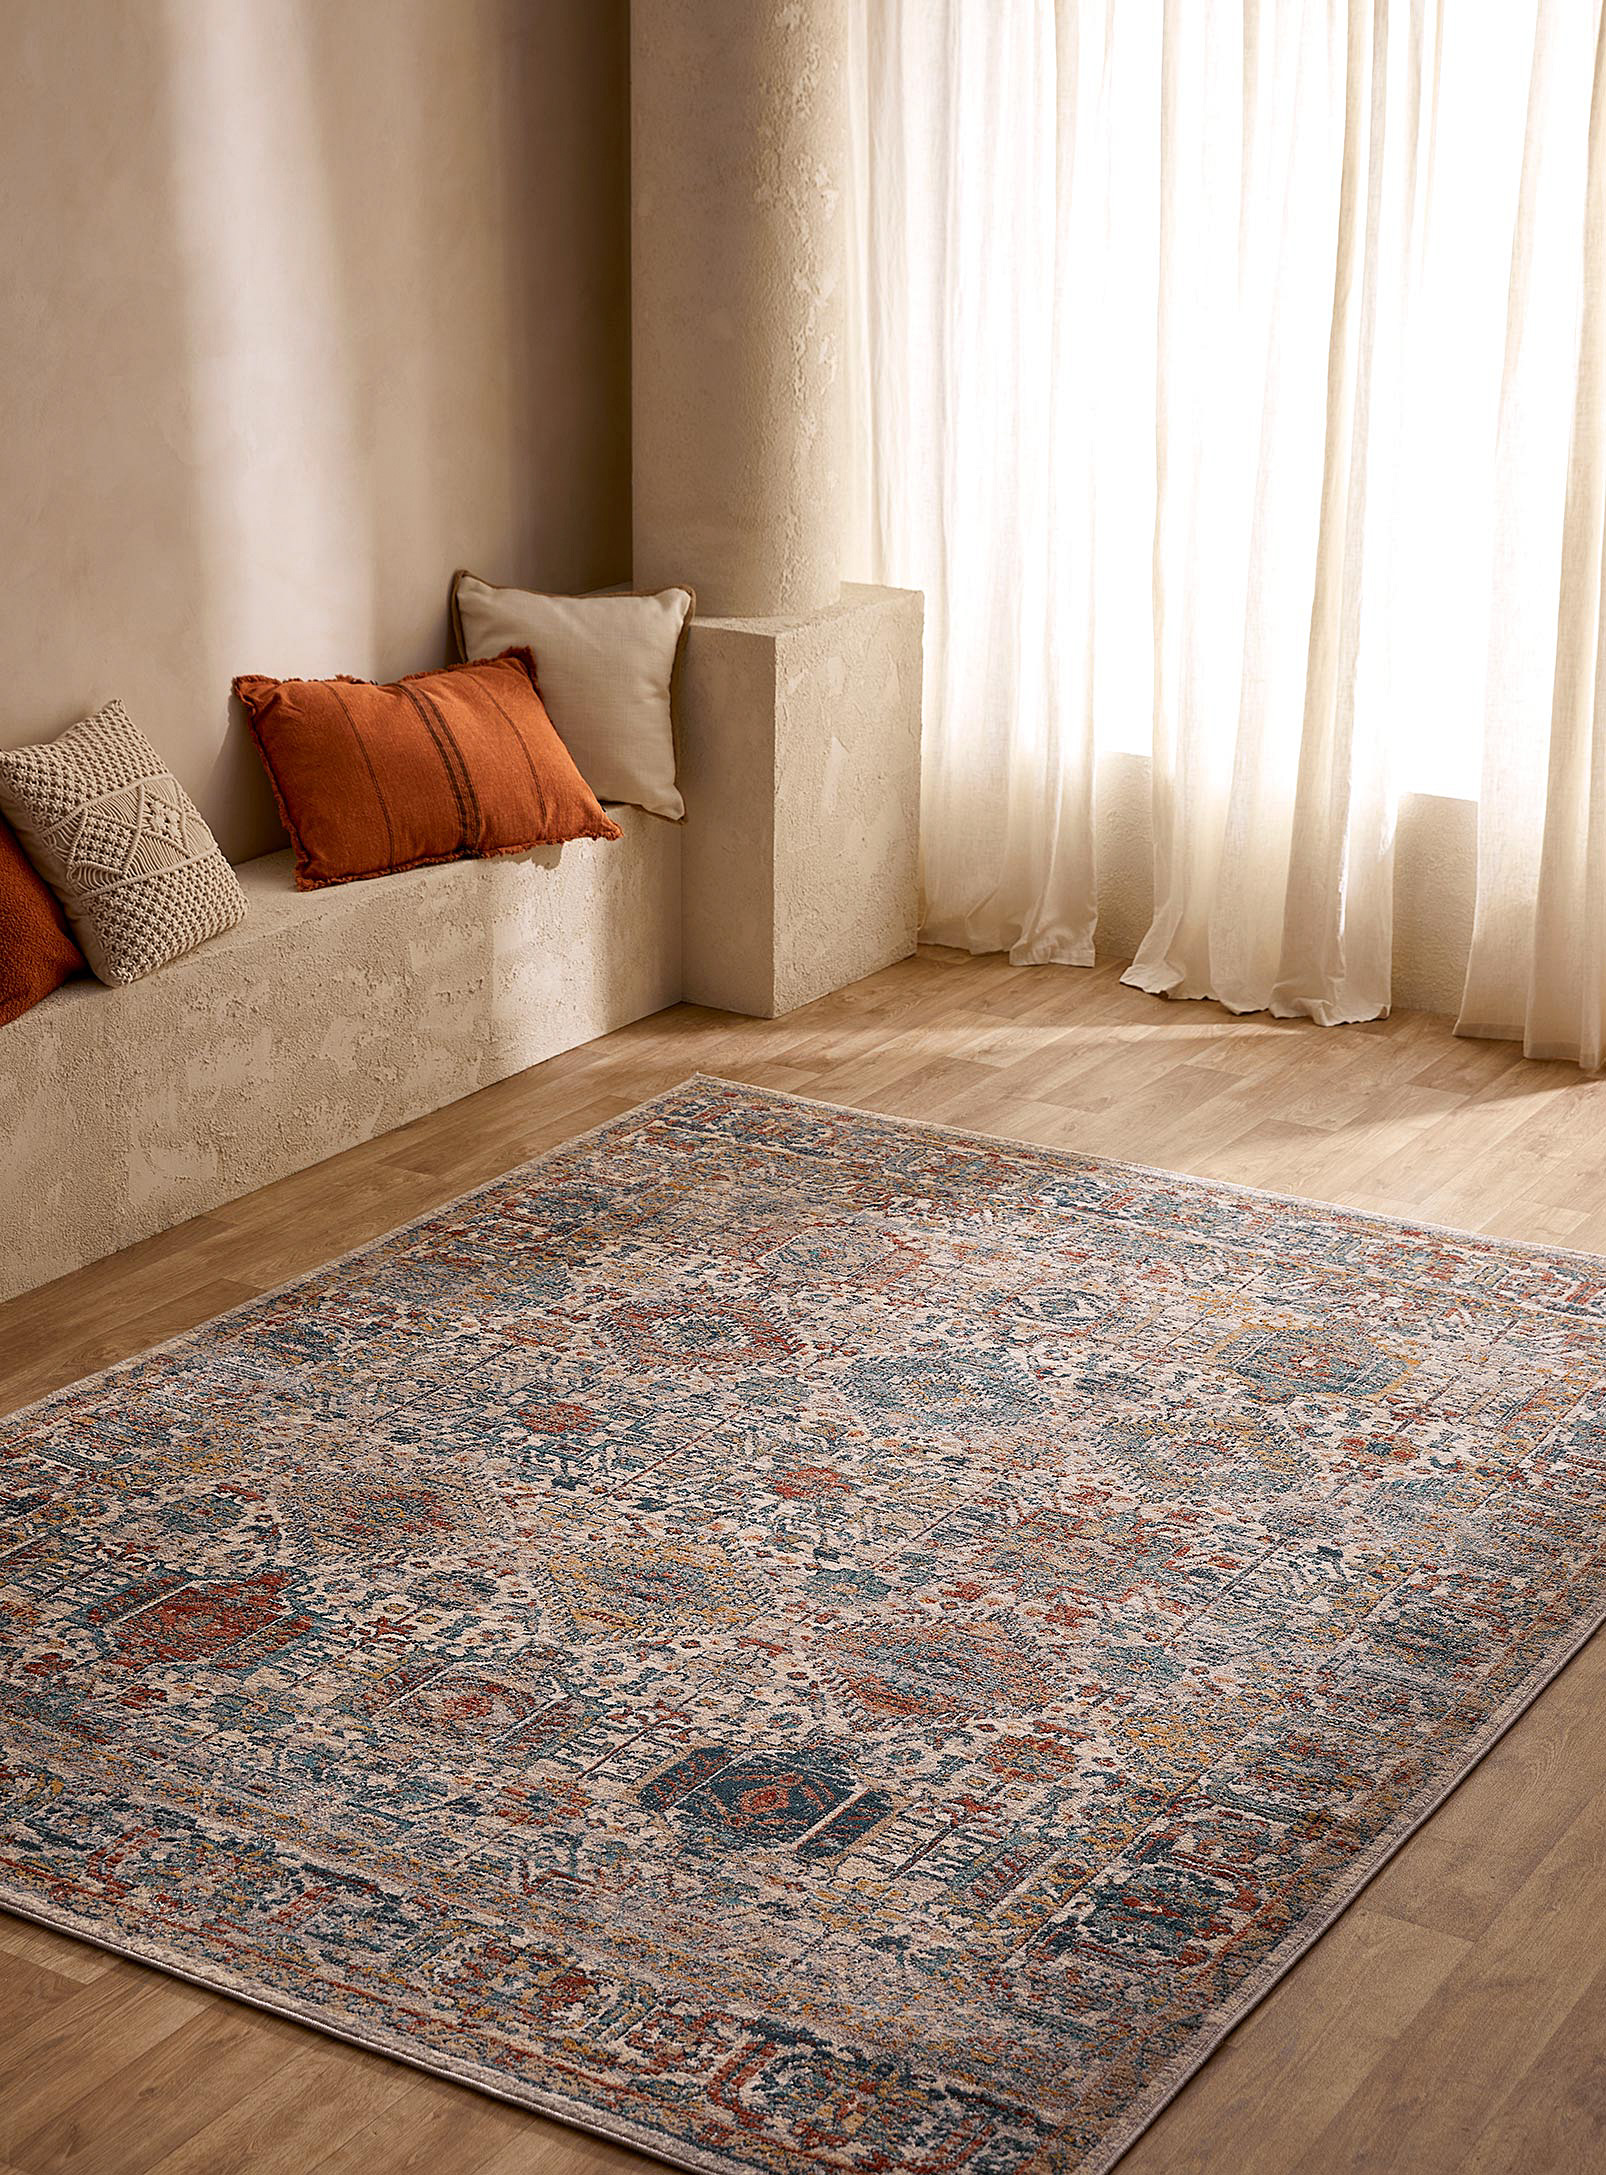 Simons Maison Lost City Rug See Available Sizes In Patterned Ecru